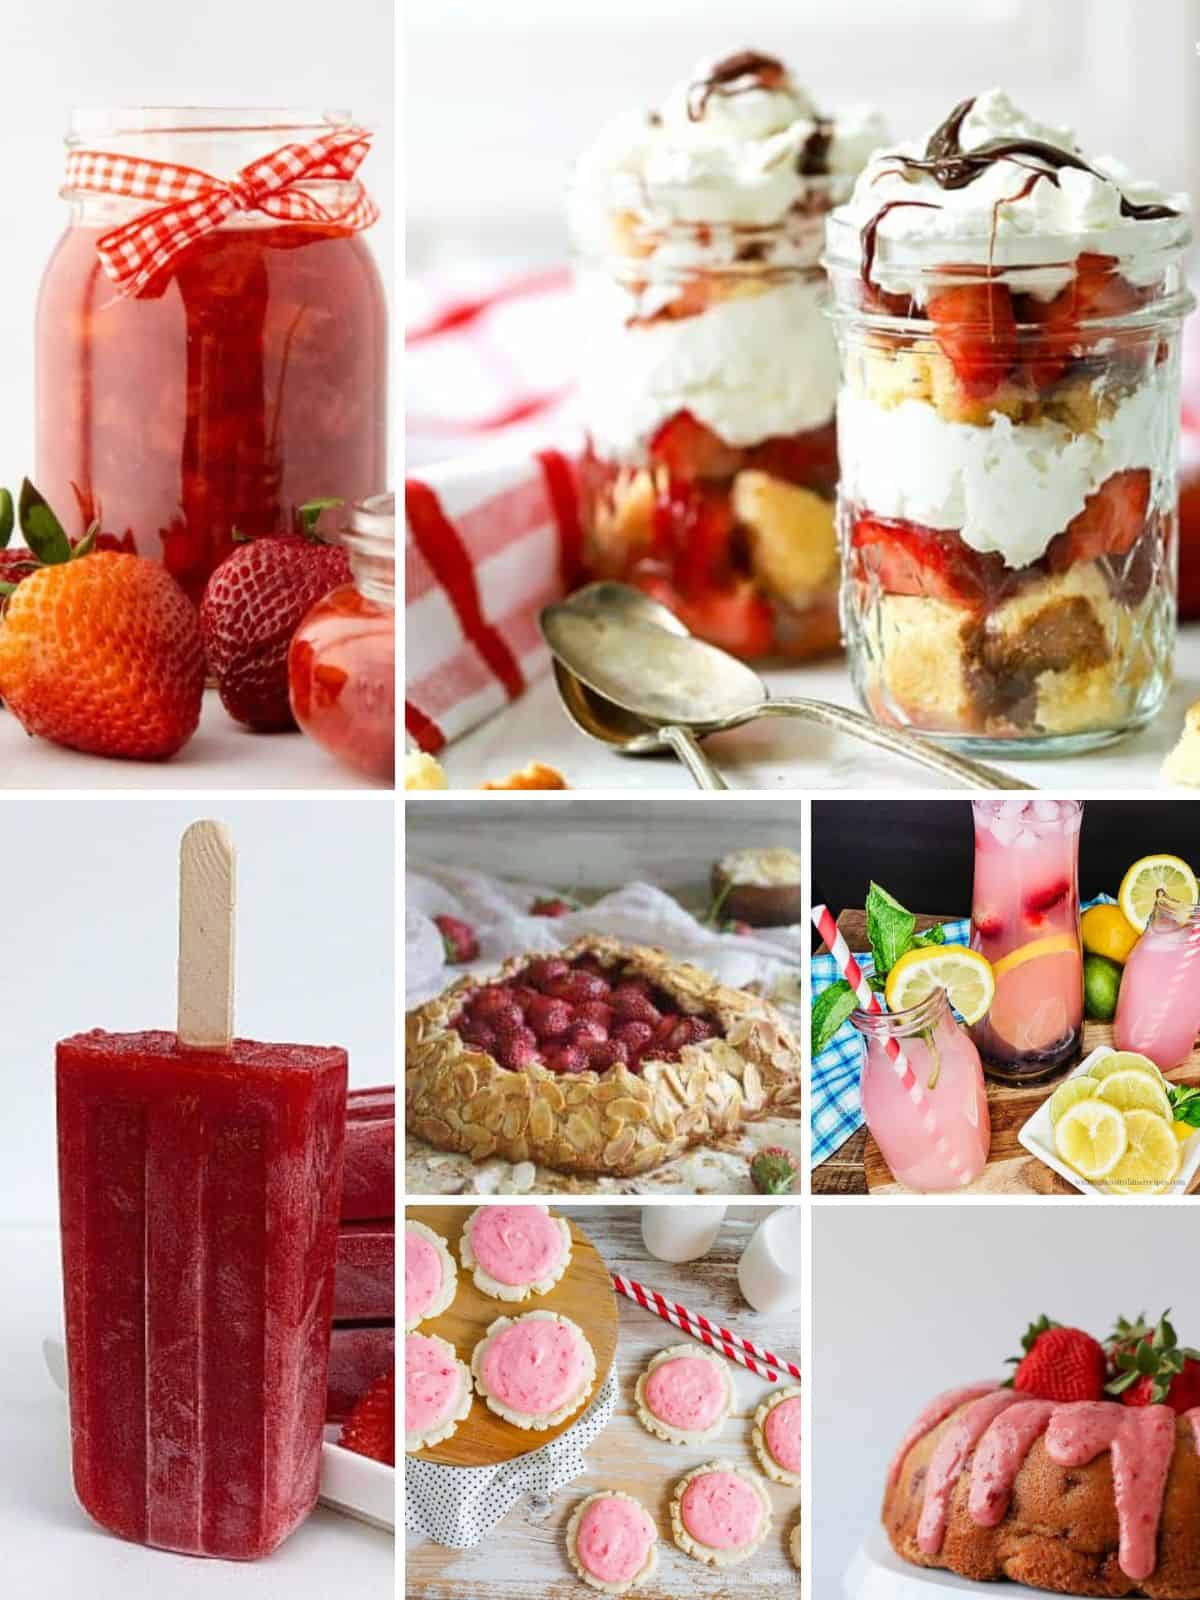 A collection of different strawberry dessert recipes and beverages.